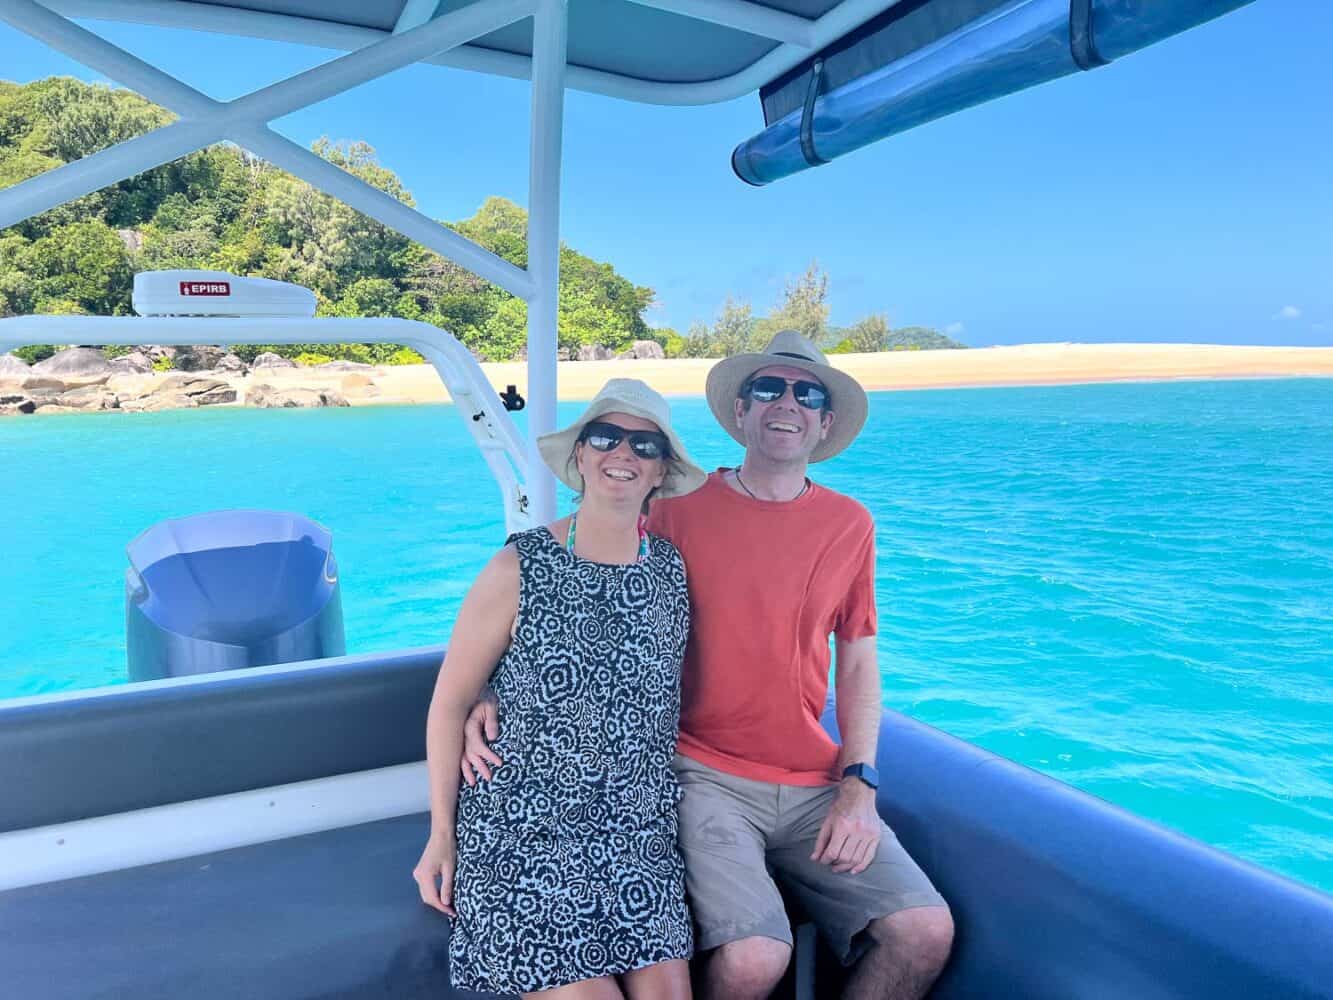 Erin and Simon travelling to Wheeler Island from Bedarra Island Resort by boat, Queensland, Australia